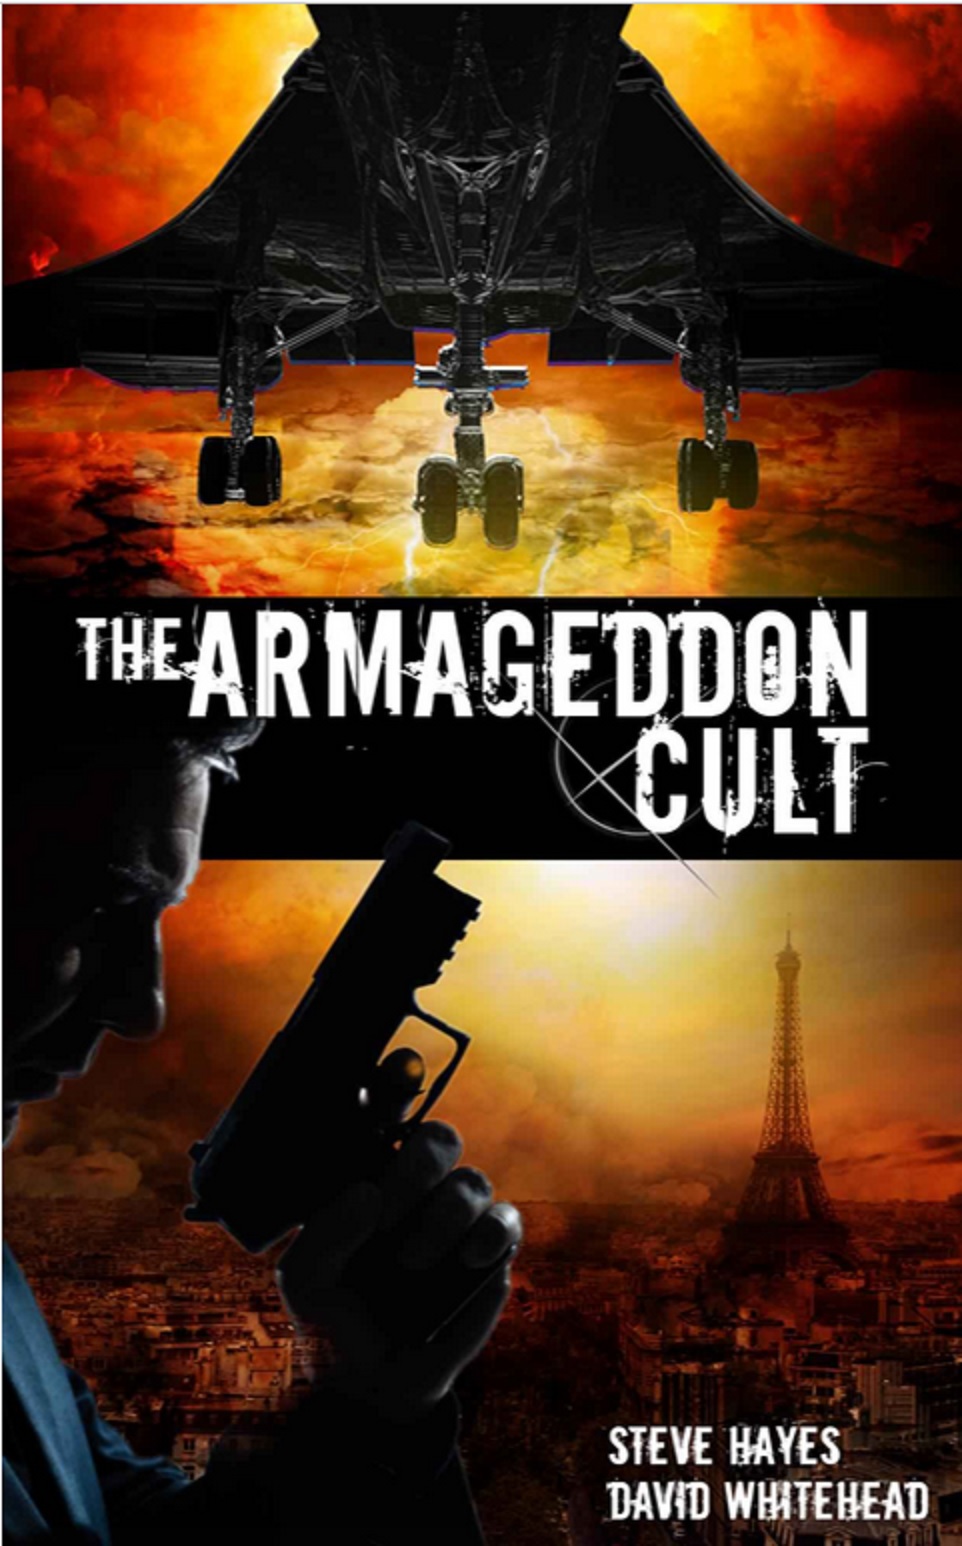 The Armageddon Cult by Steve Hayes and David Whitehead